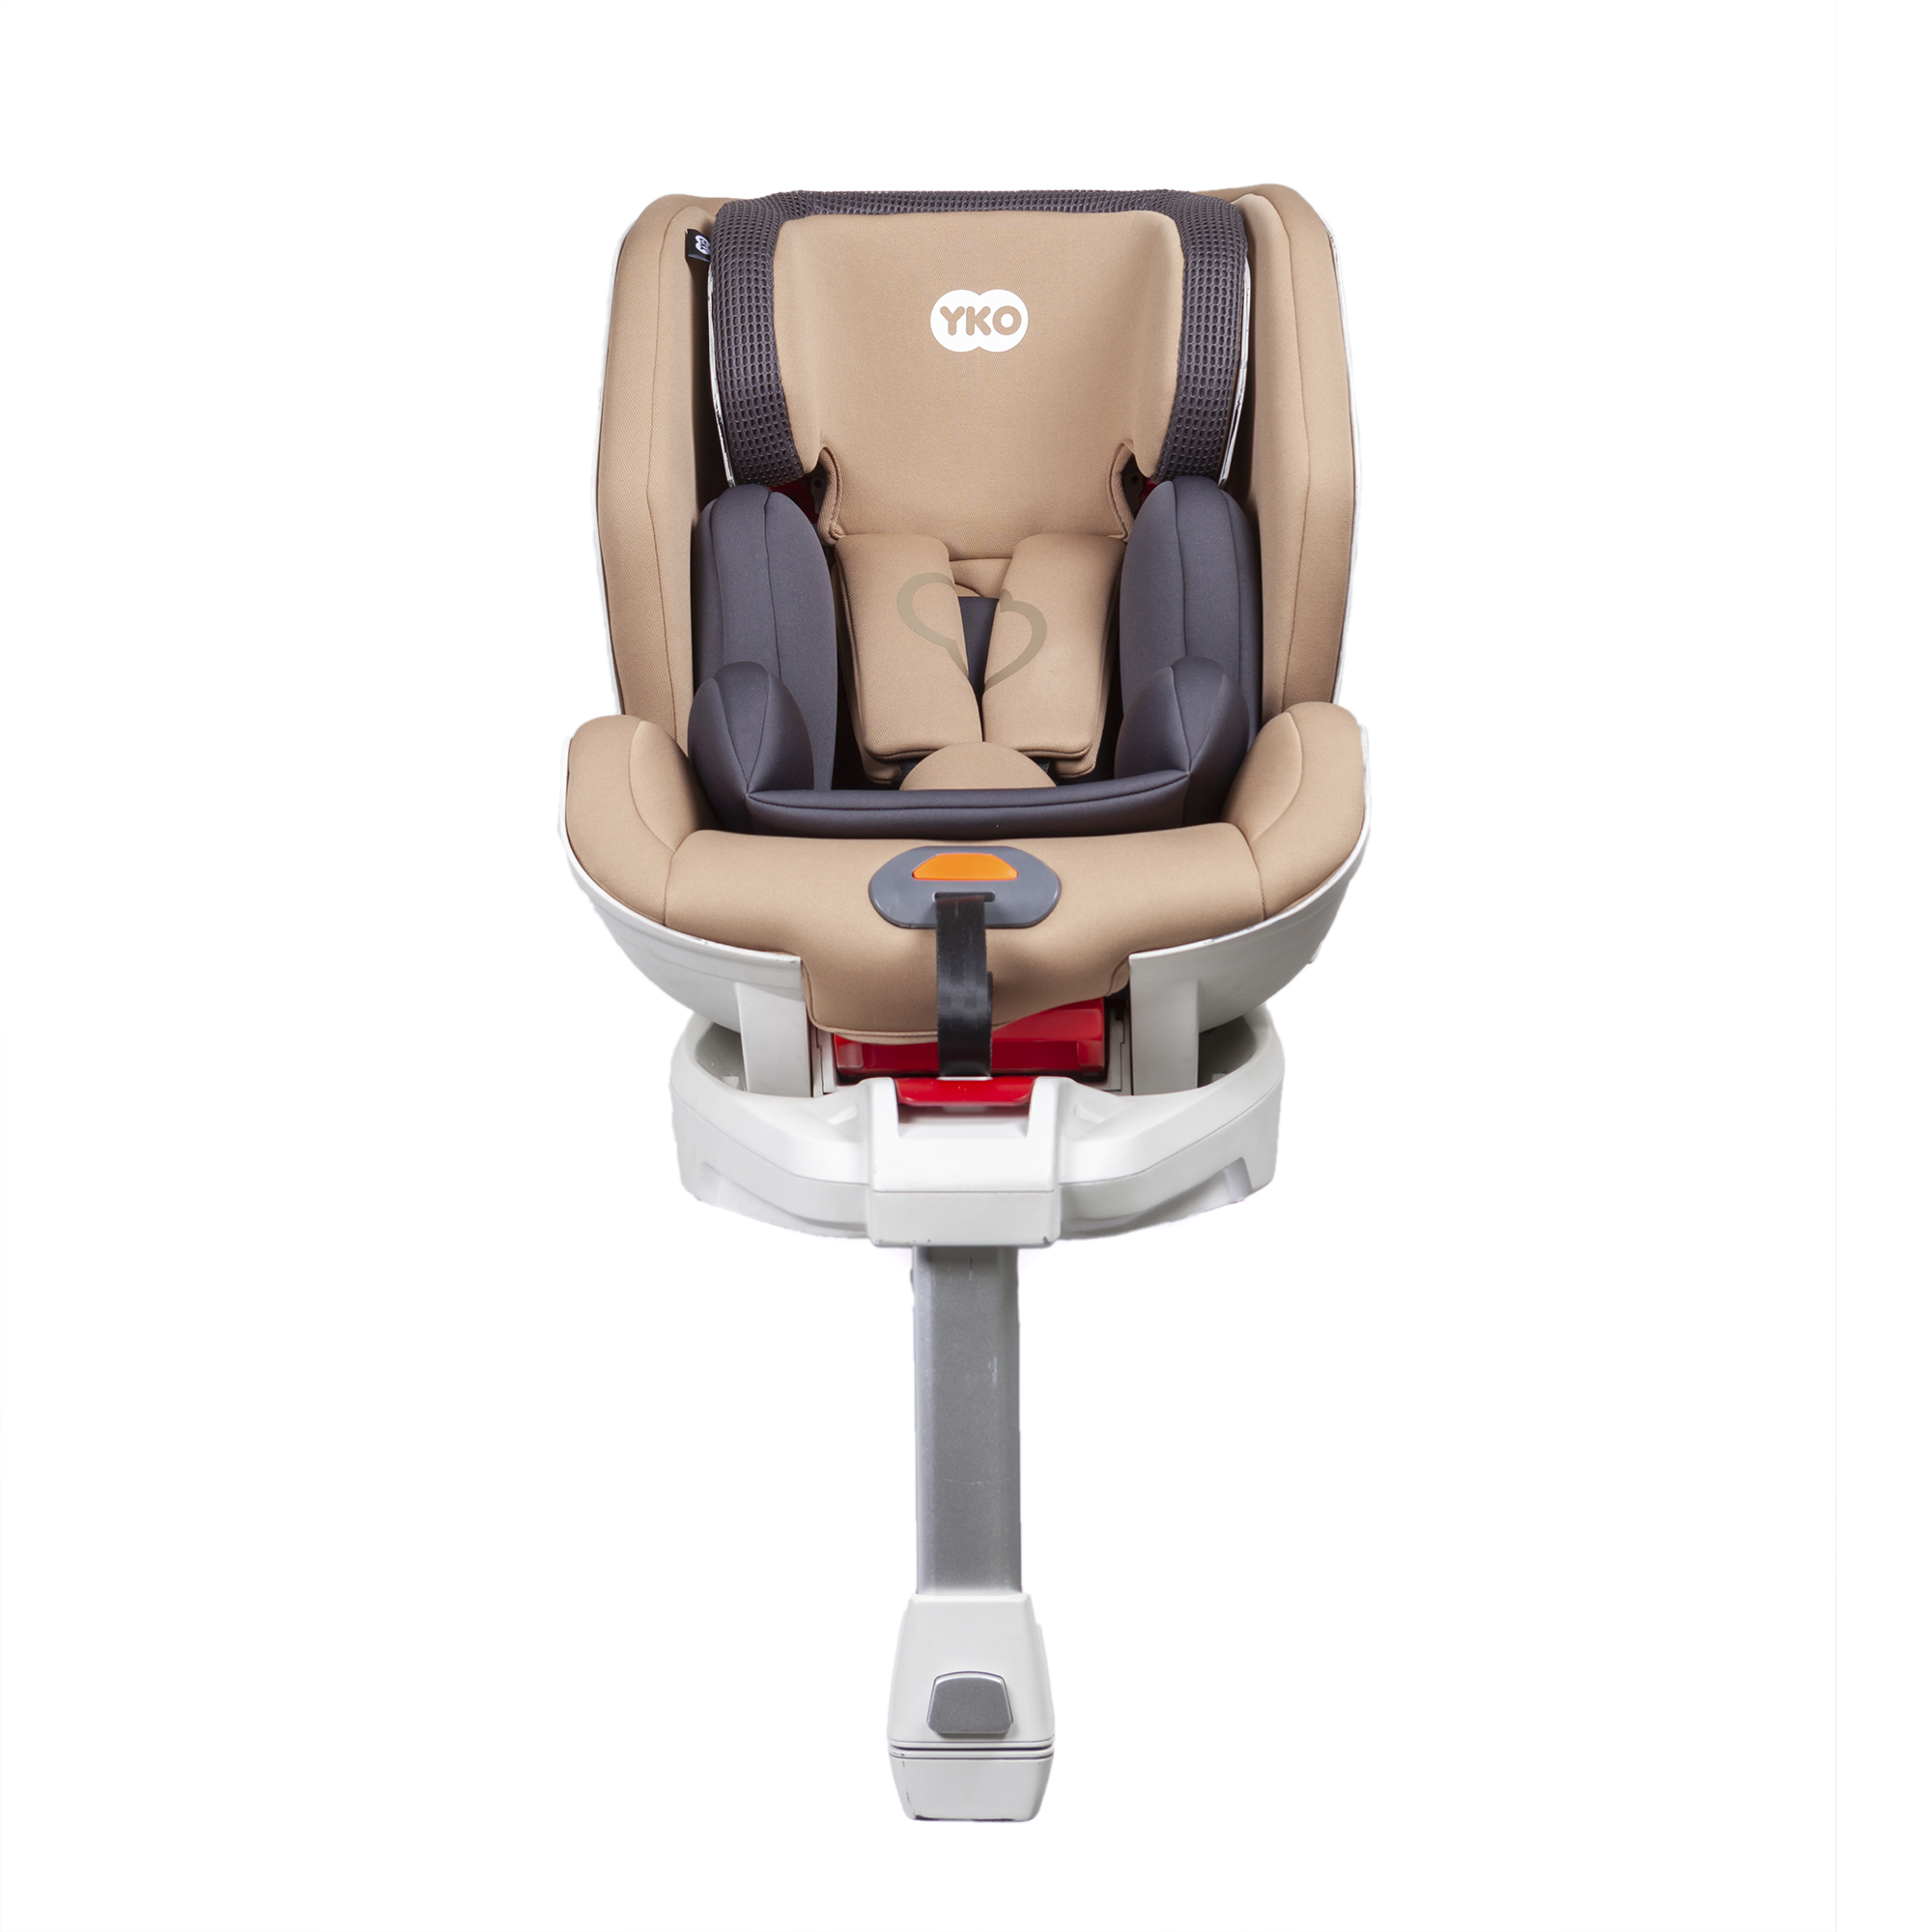 YKO-616 Covertible Child Car Seat